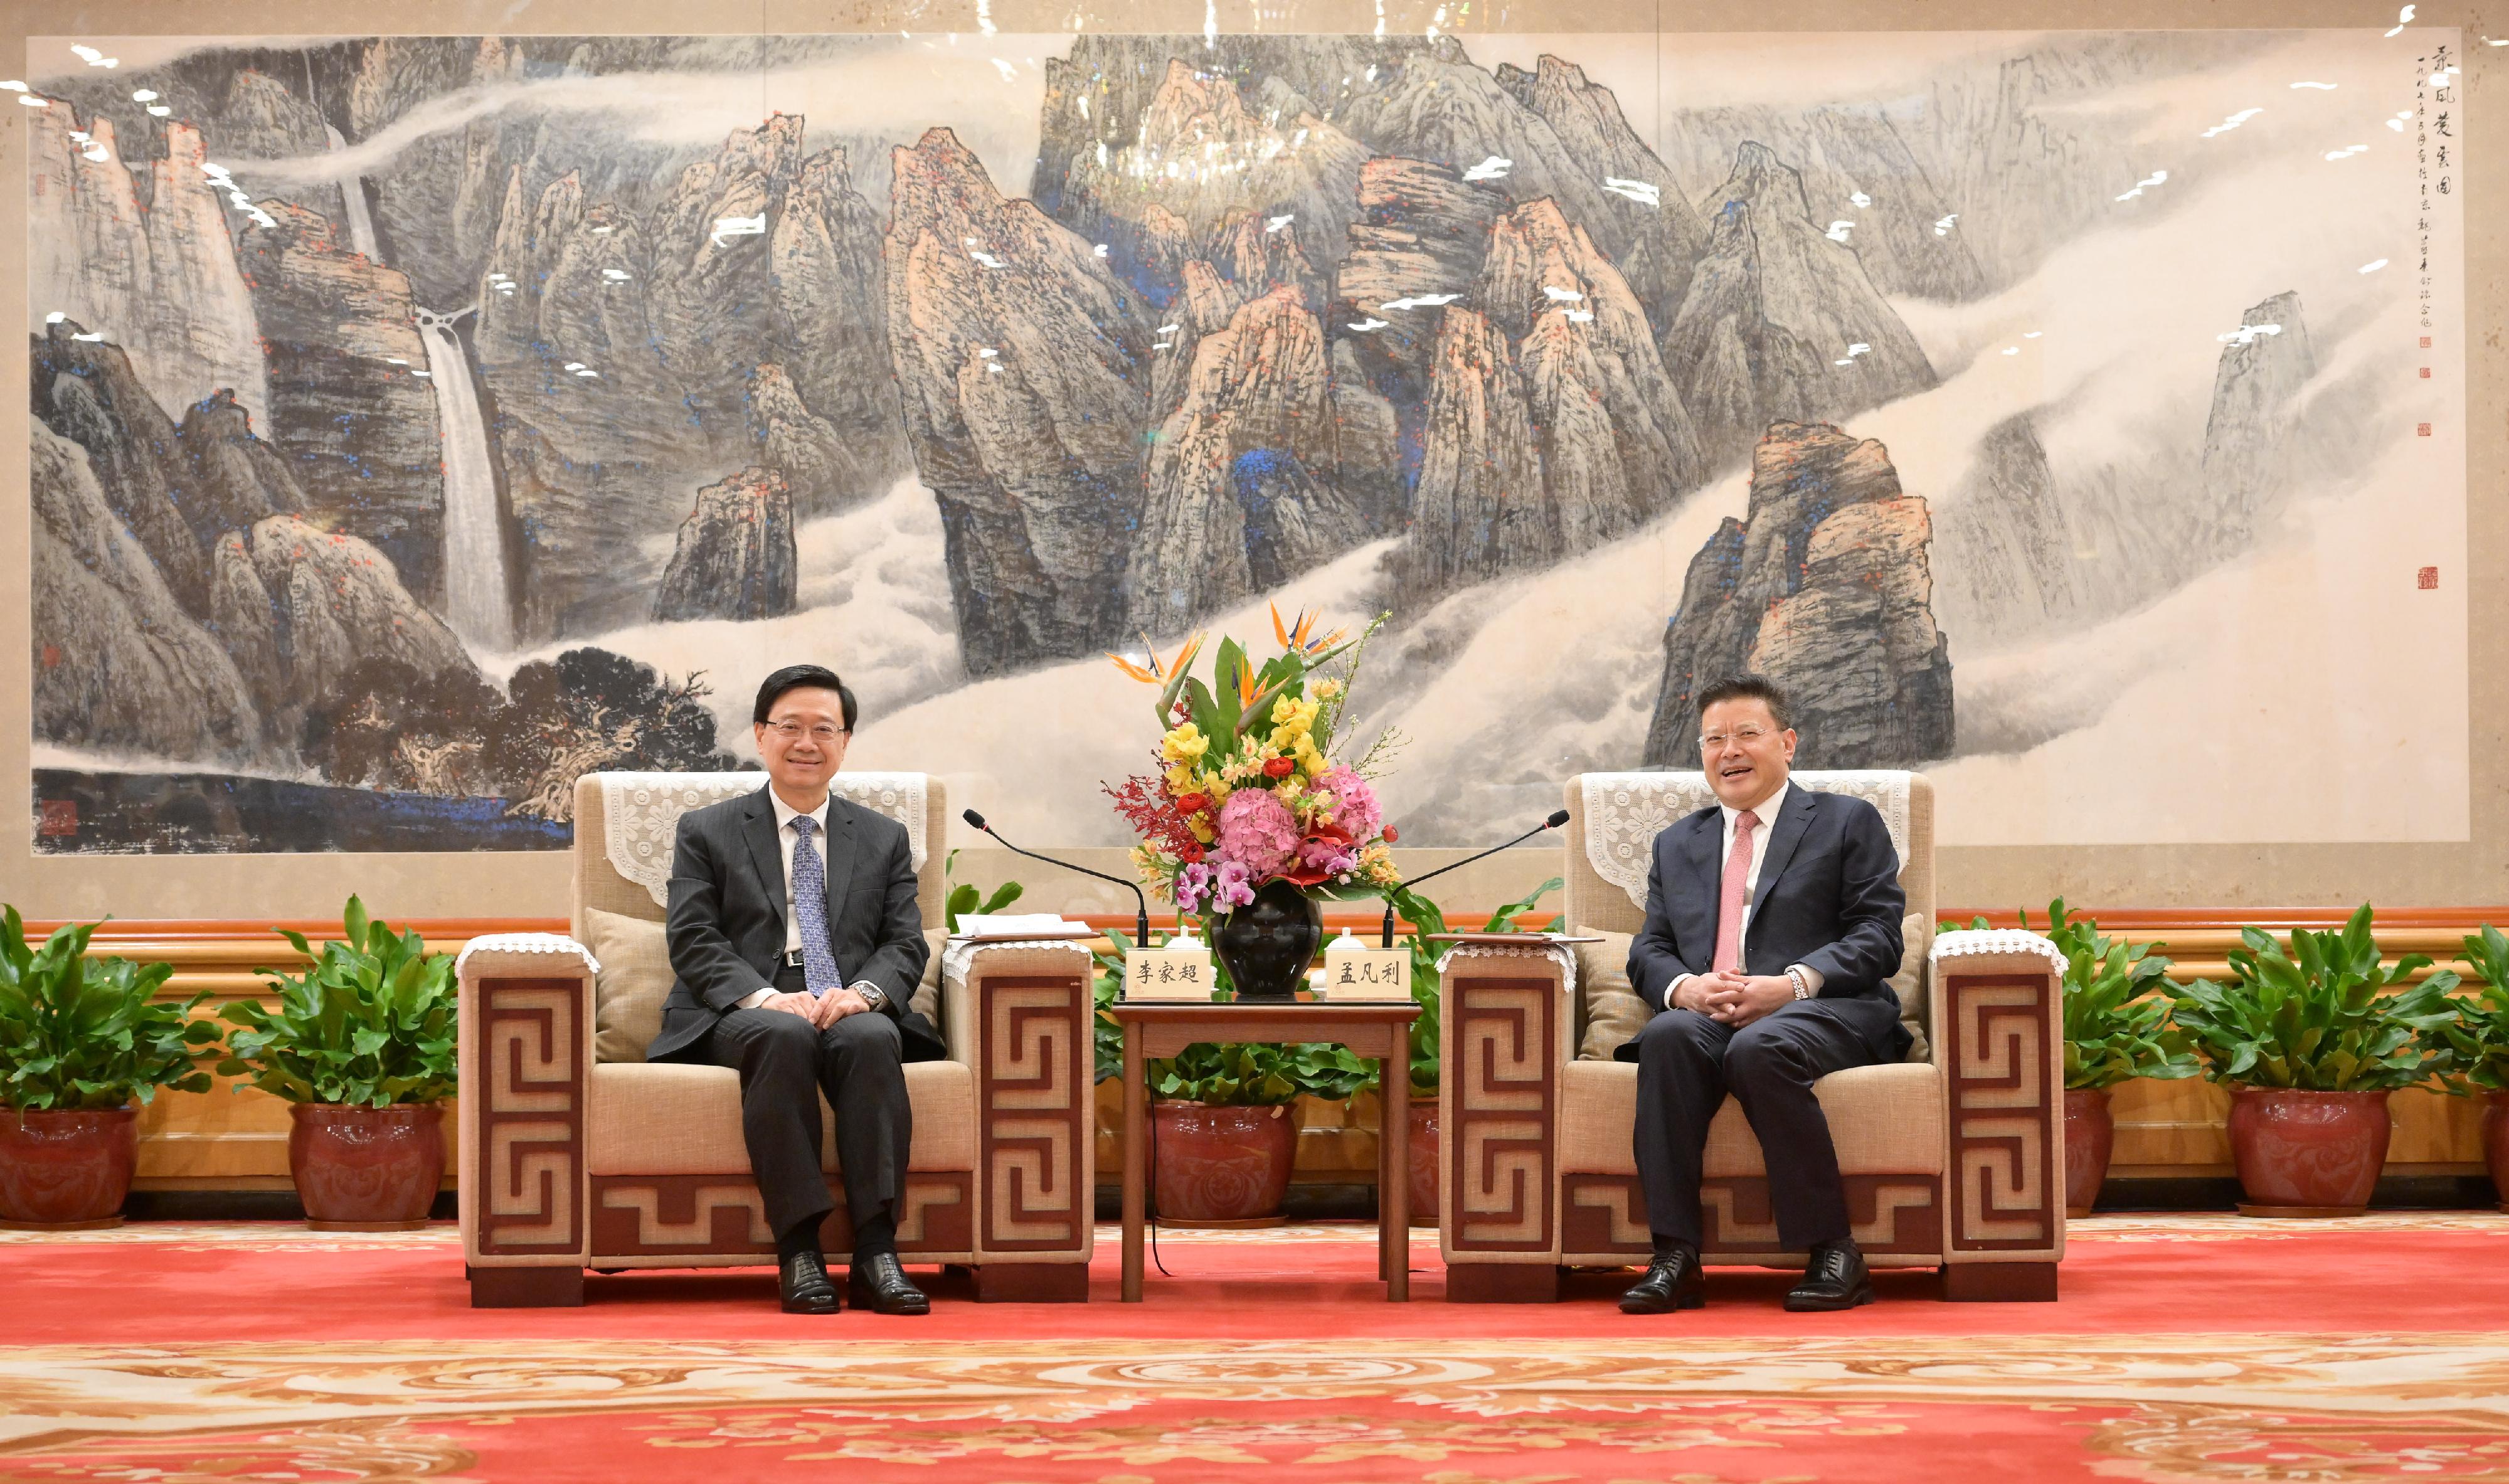 The Chief Executive, Mr John Lee, led a delegation to visit Guangzhou and Shenzhen today (February 23). Photo shows Mr Lee (left) meeting the Secretary of the CPC Shenzhen Municipal Committee, Mr Meng Fanli (right), in Shenzhen.